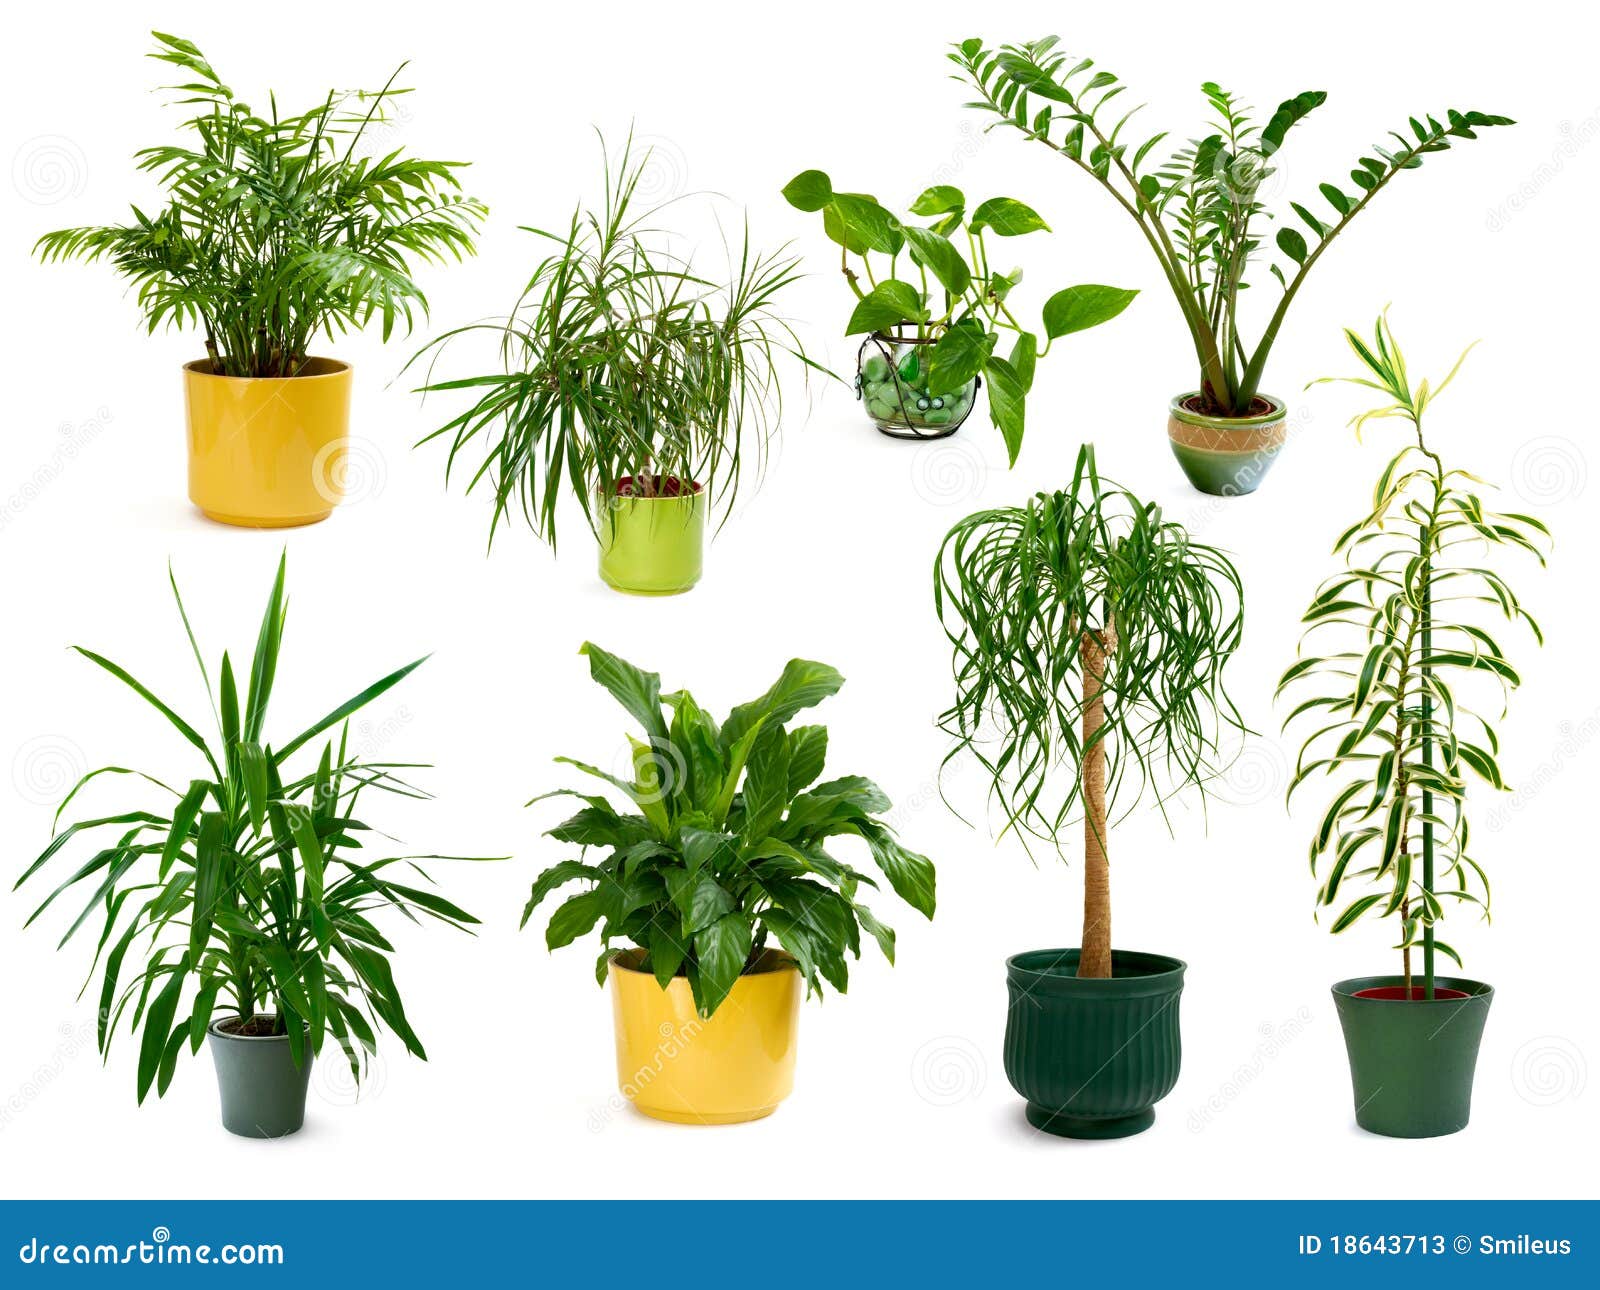 eight different indoor plants in a set